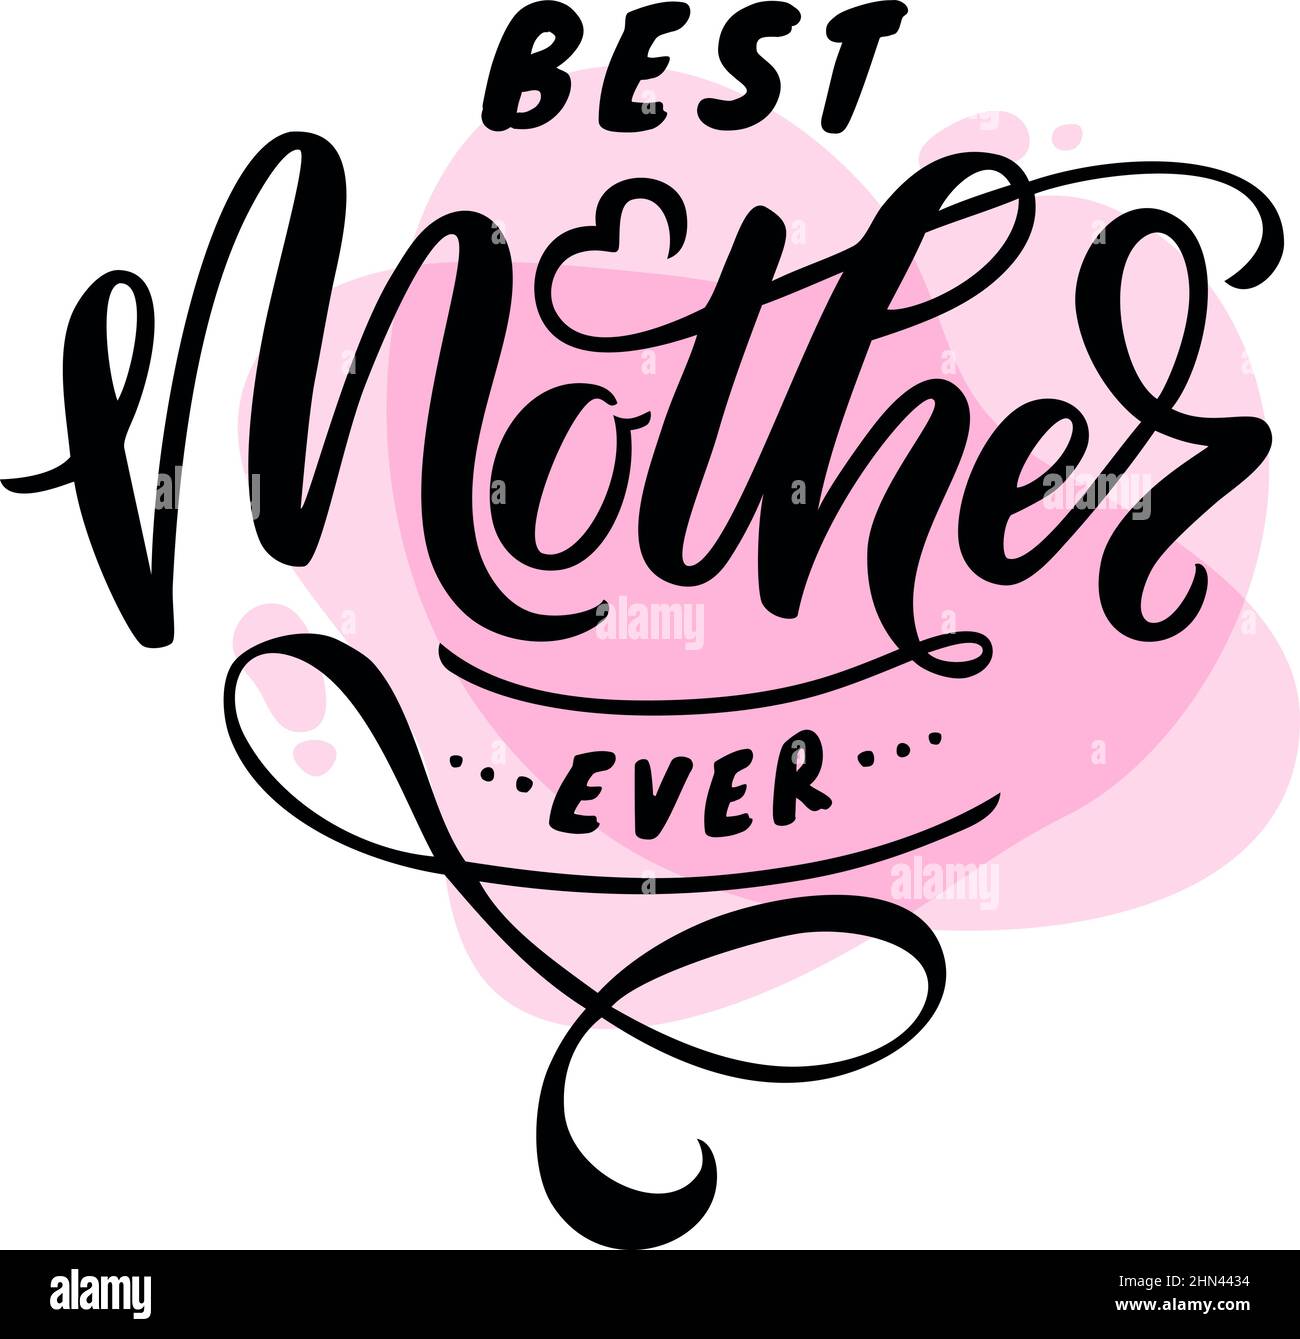 Best Mother ever - hand lettering. Illustration of quote isolated on white background. Vector design. Stock Vector